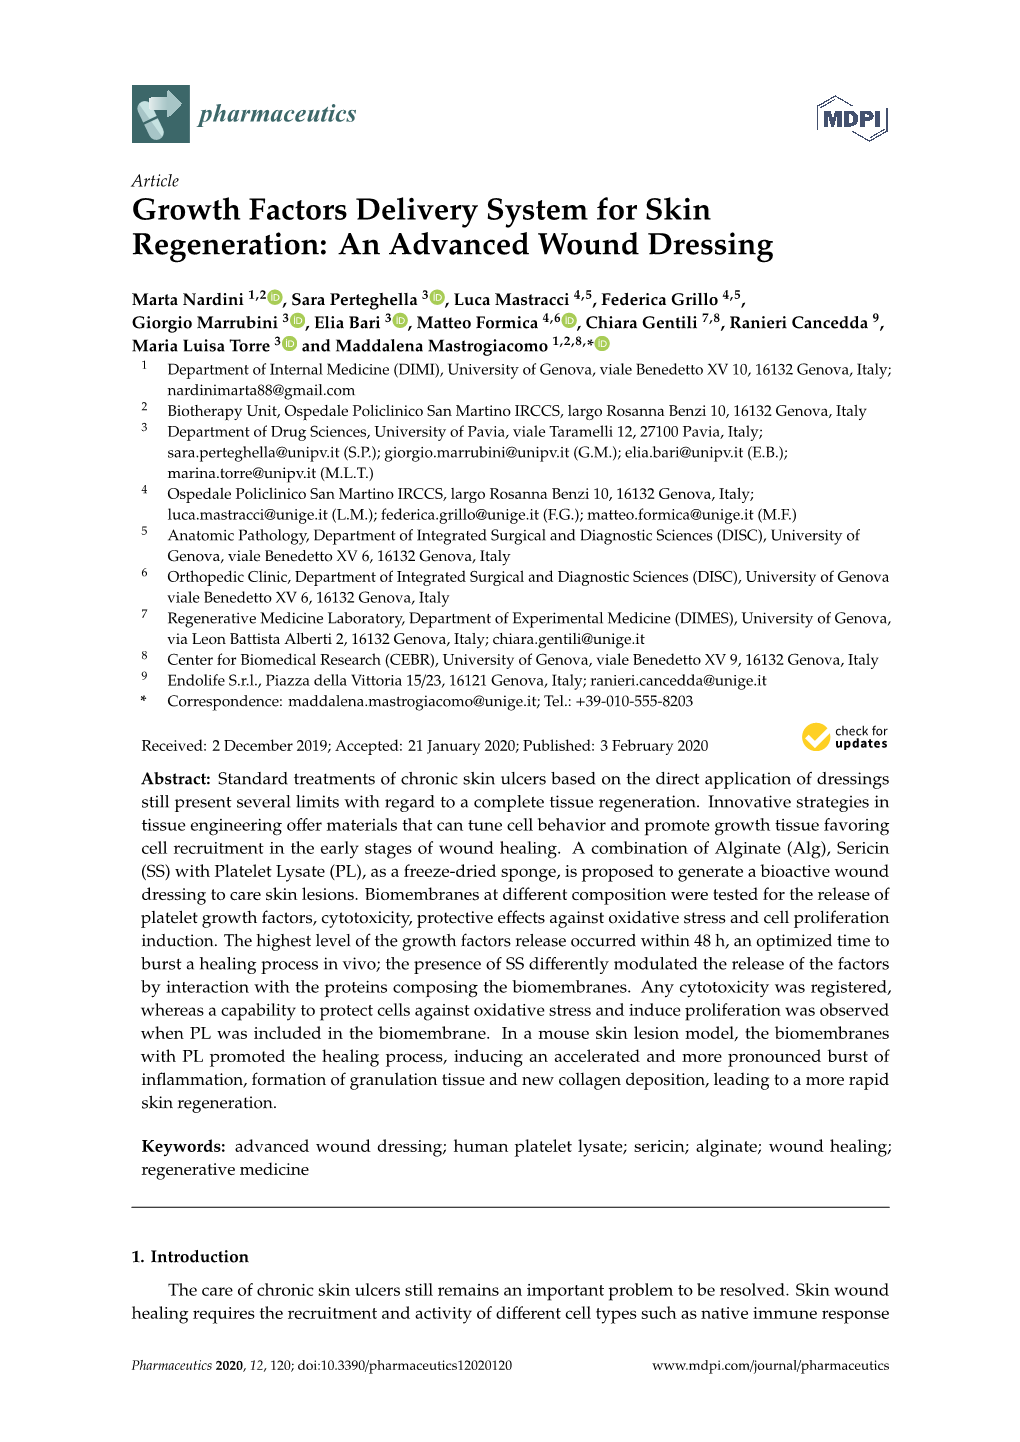 Growth Factors Delivery System for Skin Regeneration: an Advanced Wound Dressing